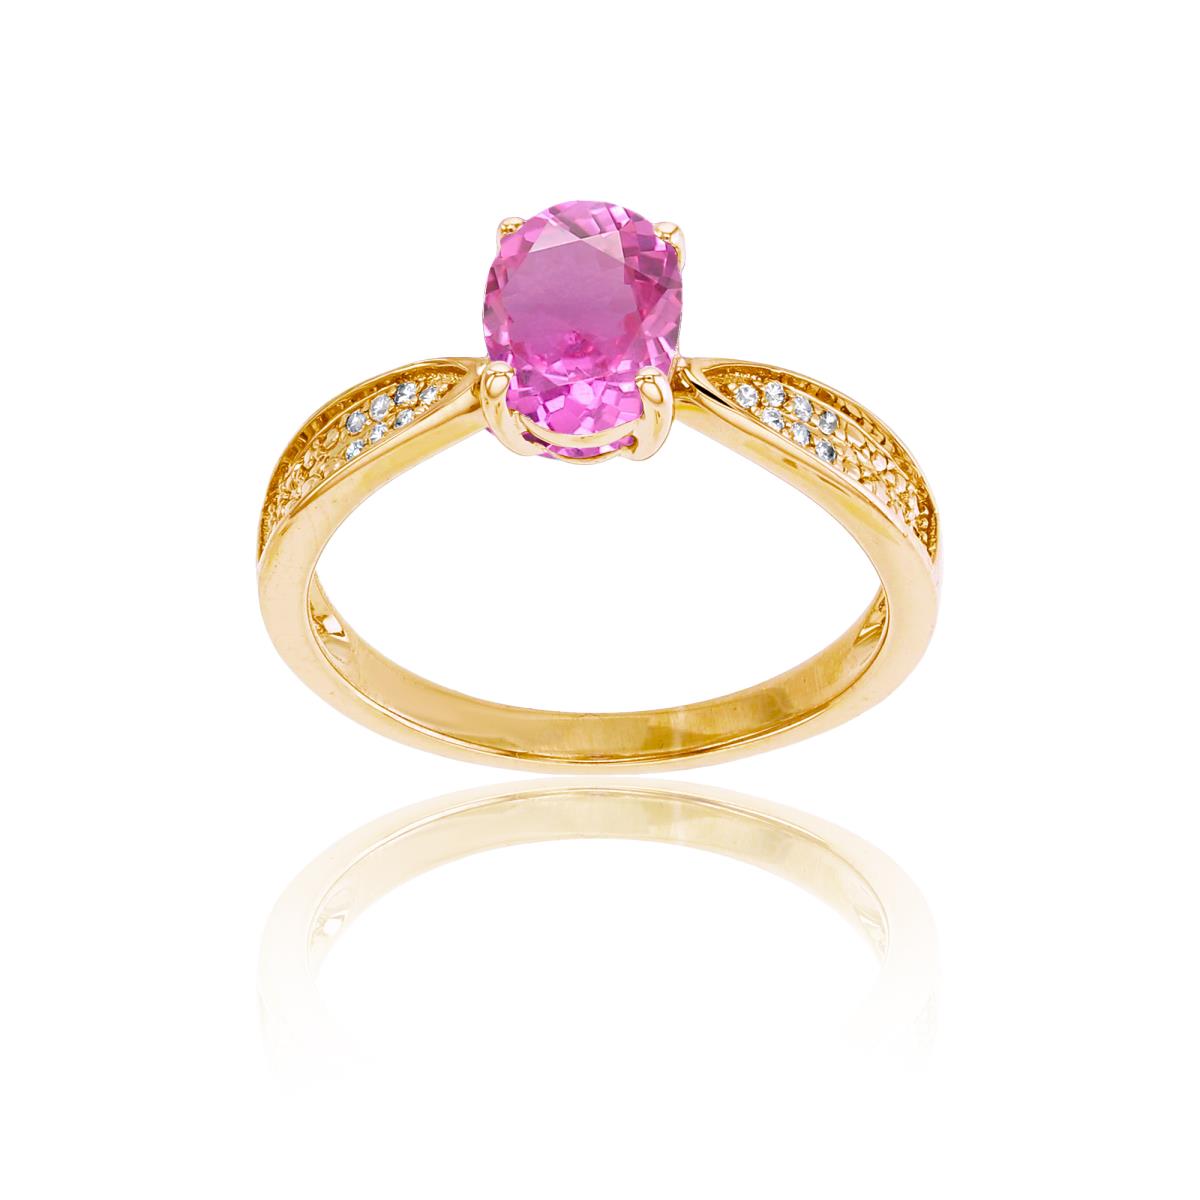 Sterling Silver Yellow 0.05 CTTW Rnd Diamonds & 8x6mm Oval Cr Pink Sapphire Center Ring